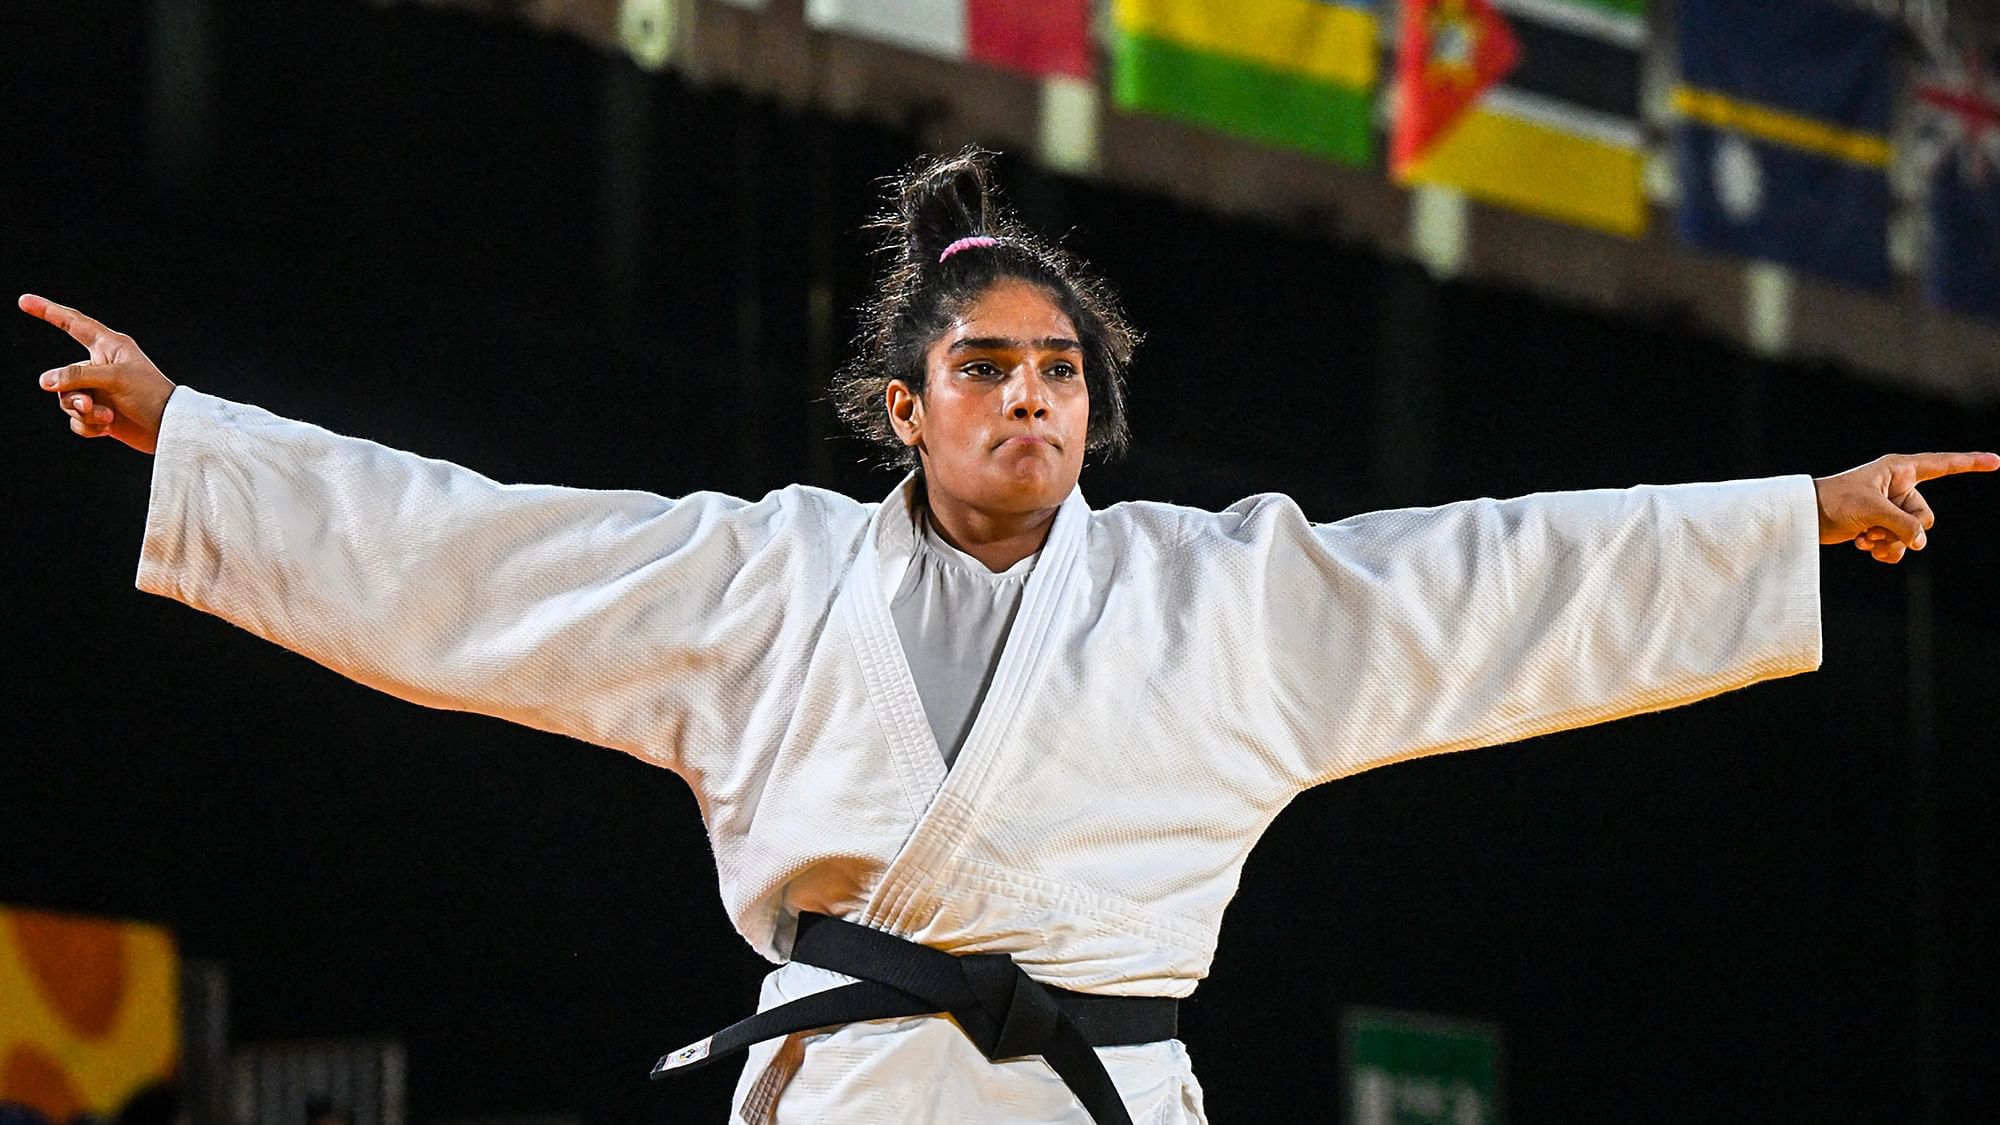 Commonwealth Games 2022 Indias Tulika Maan Wins Silver Medal in Womens +78KG Judo Event